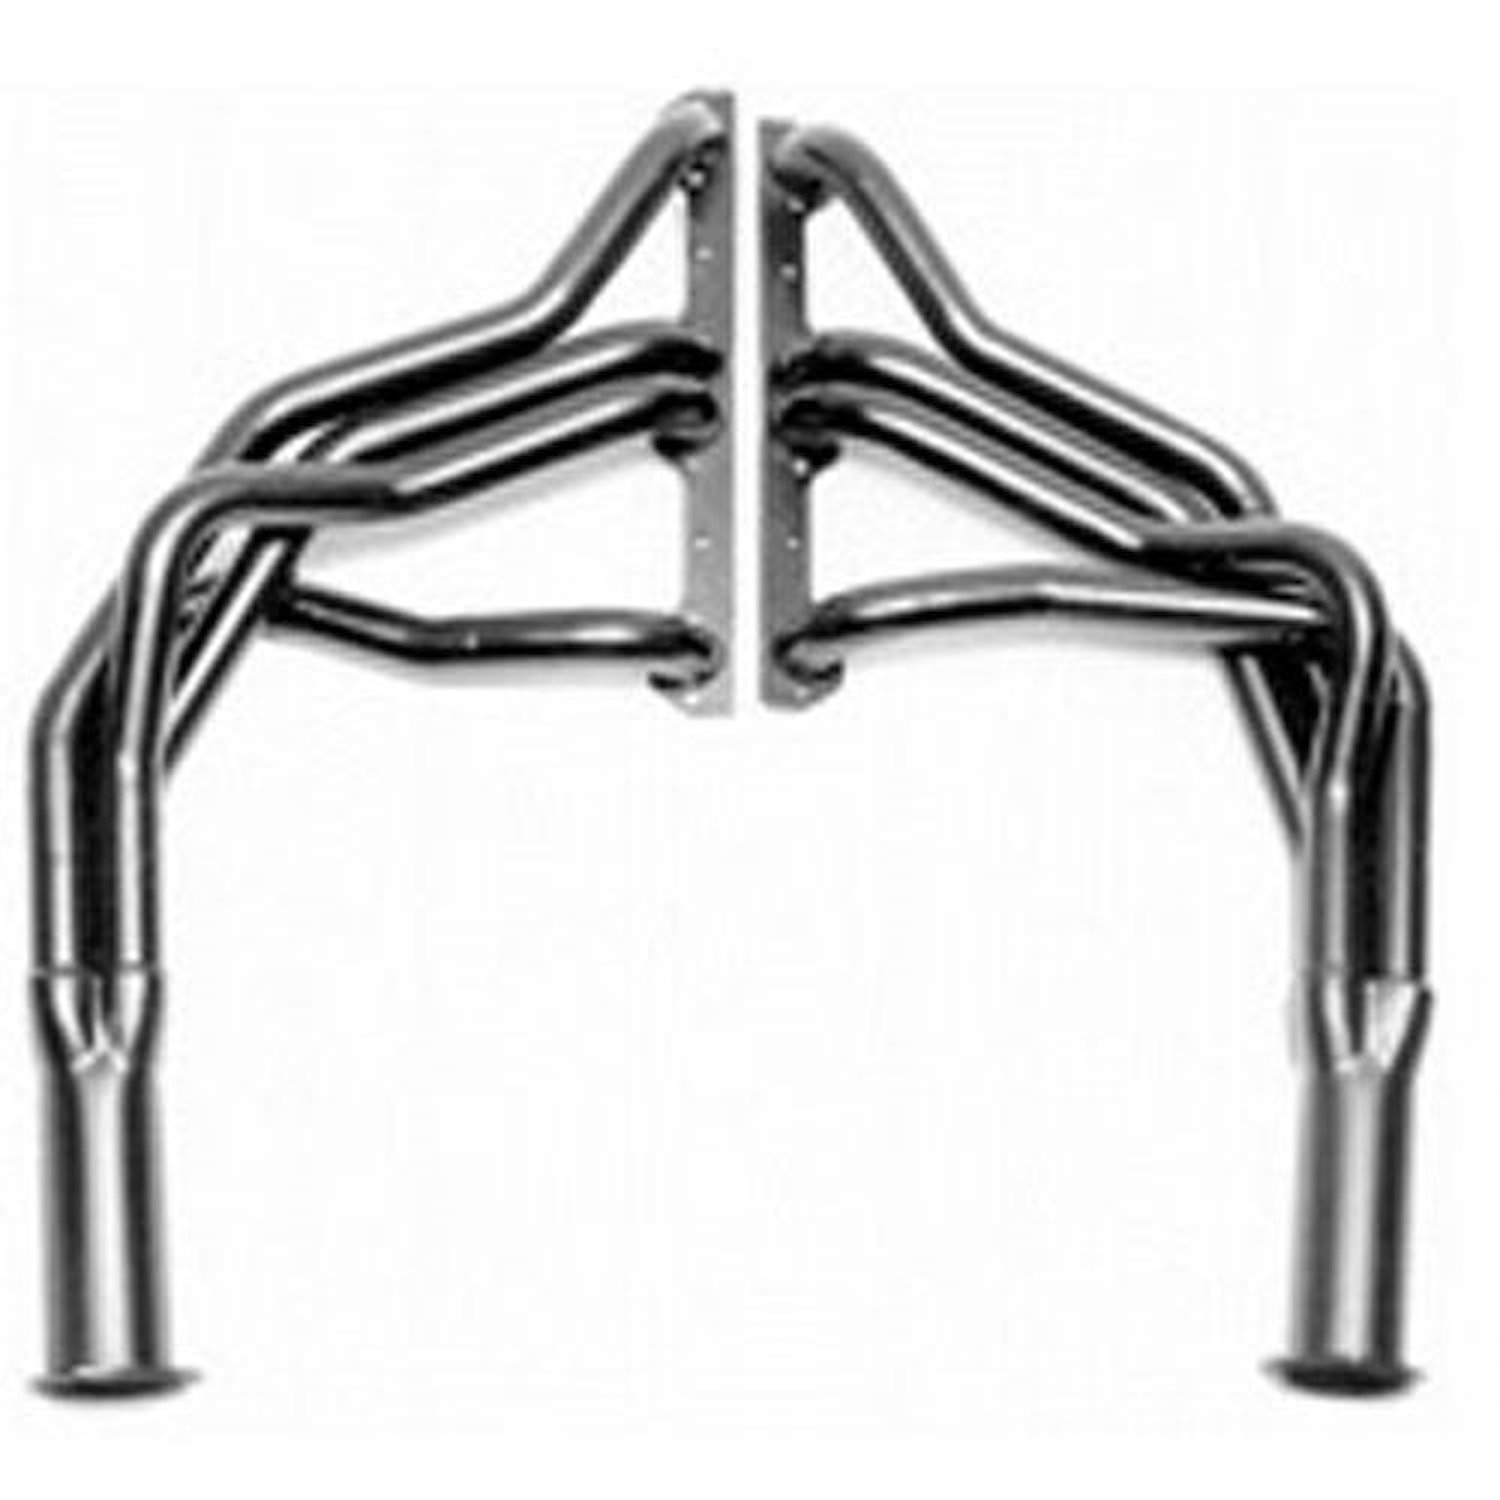 Standard Duty Full Length Uncoated Headers for 1971-82 Chevy G10,G20,G30 & CLASS C MOTORHOME 283-400